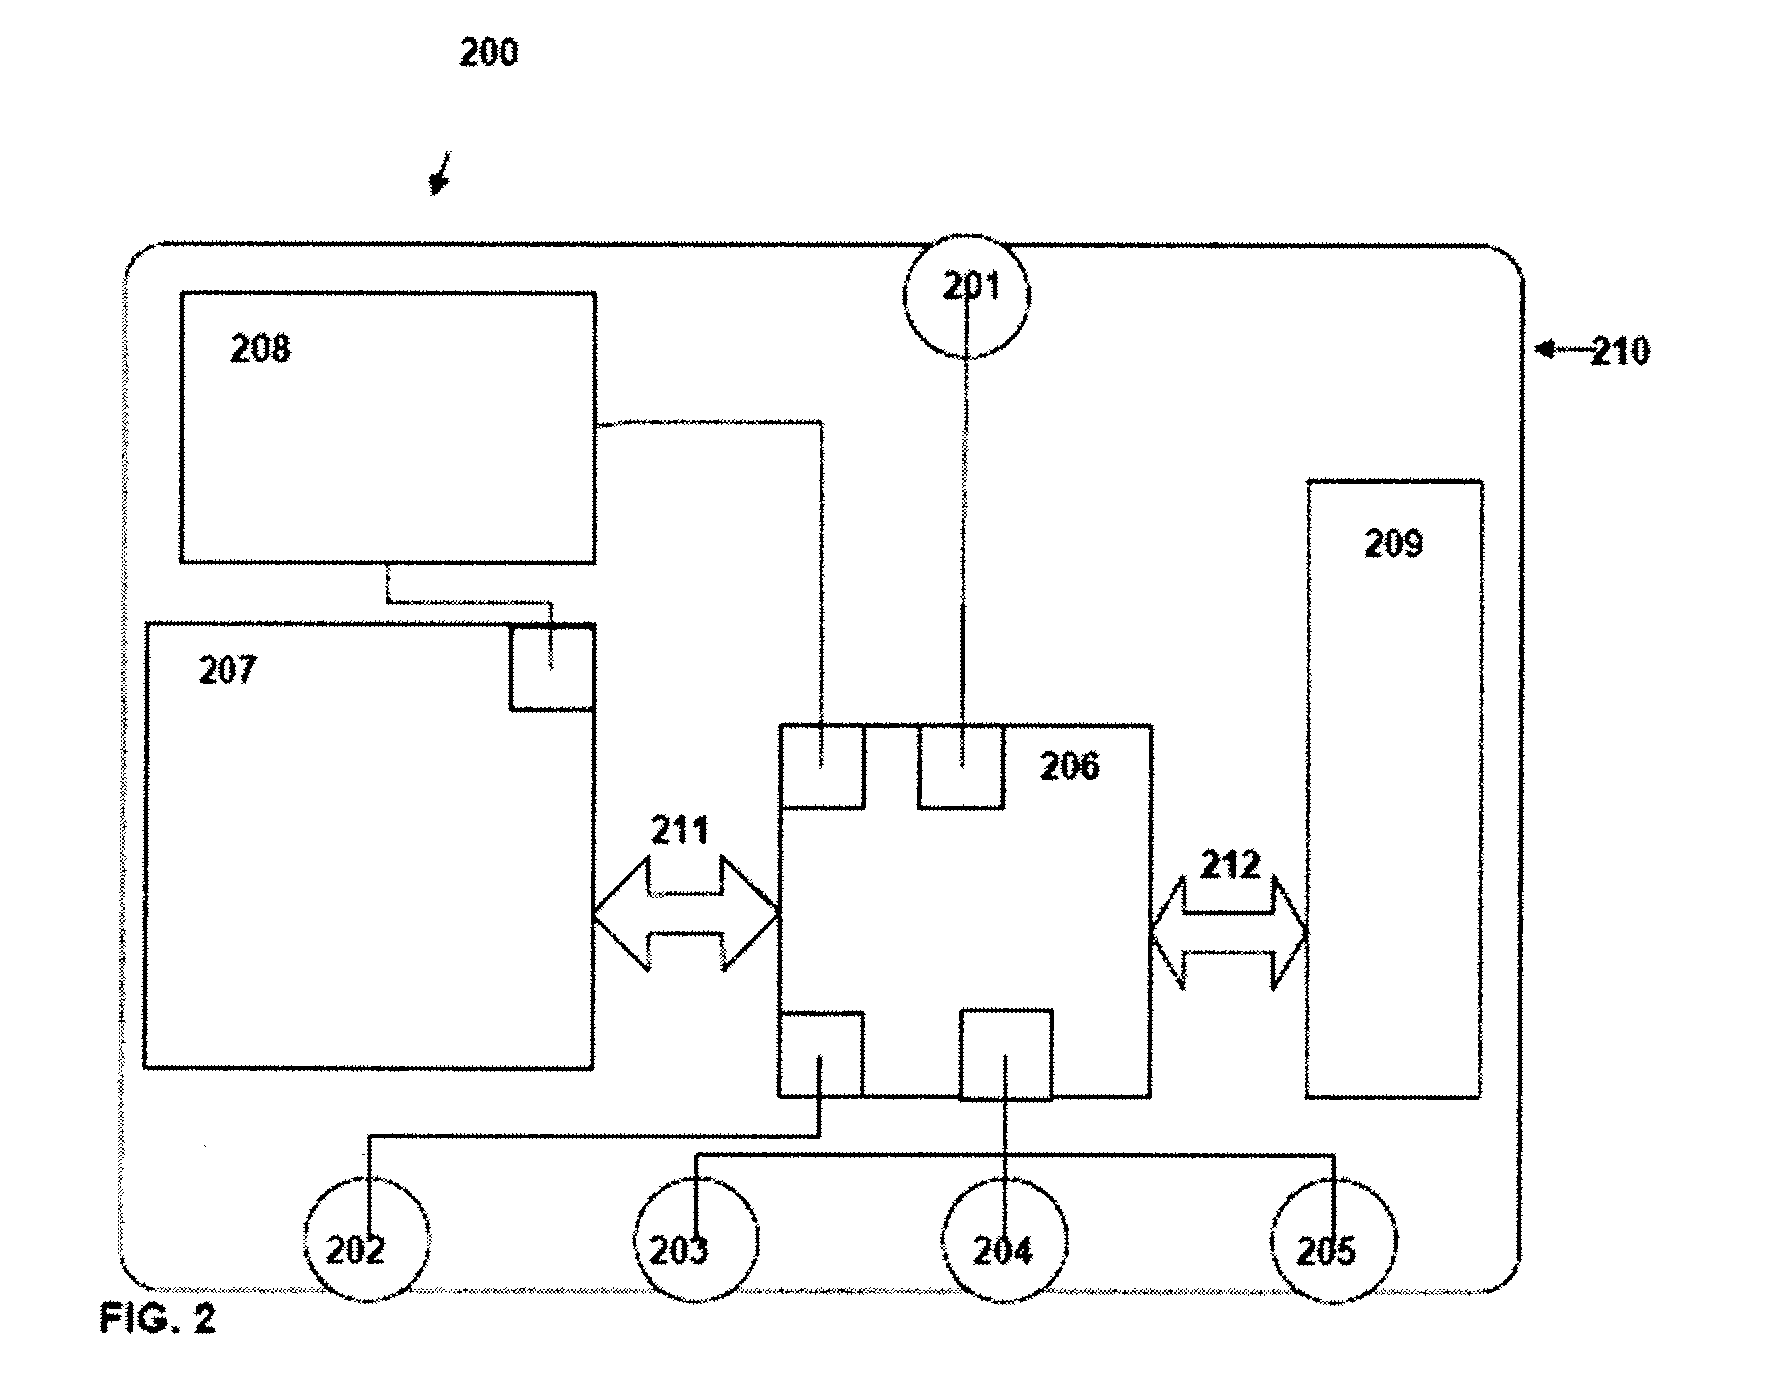 Electronic device and system for detecting rejection in transplant recipients